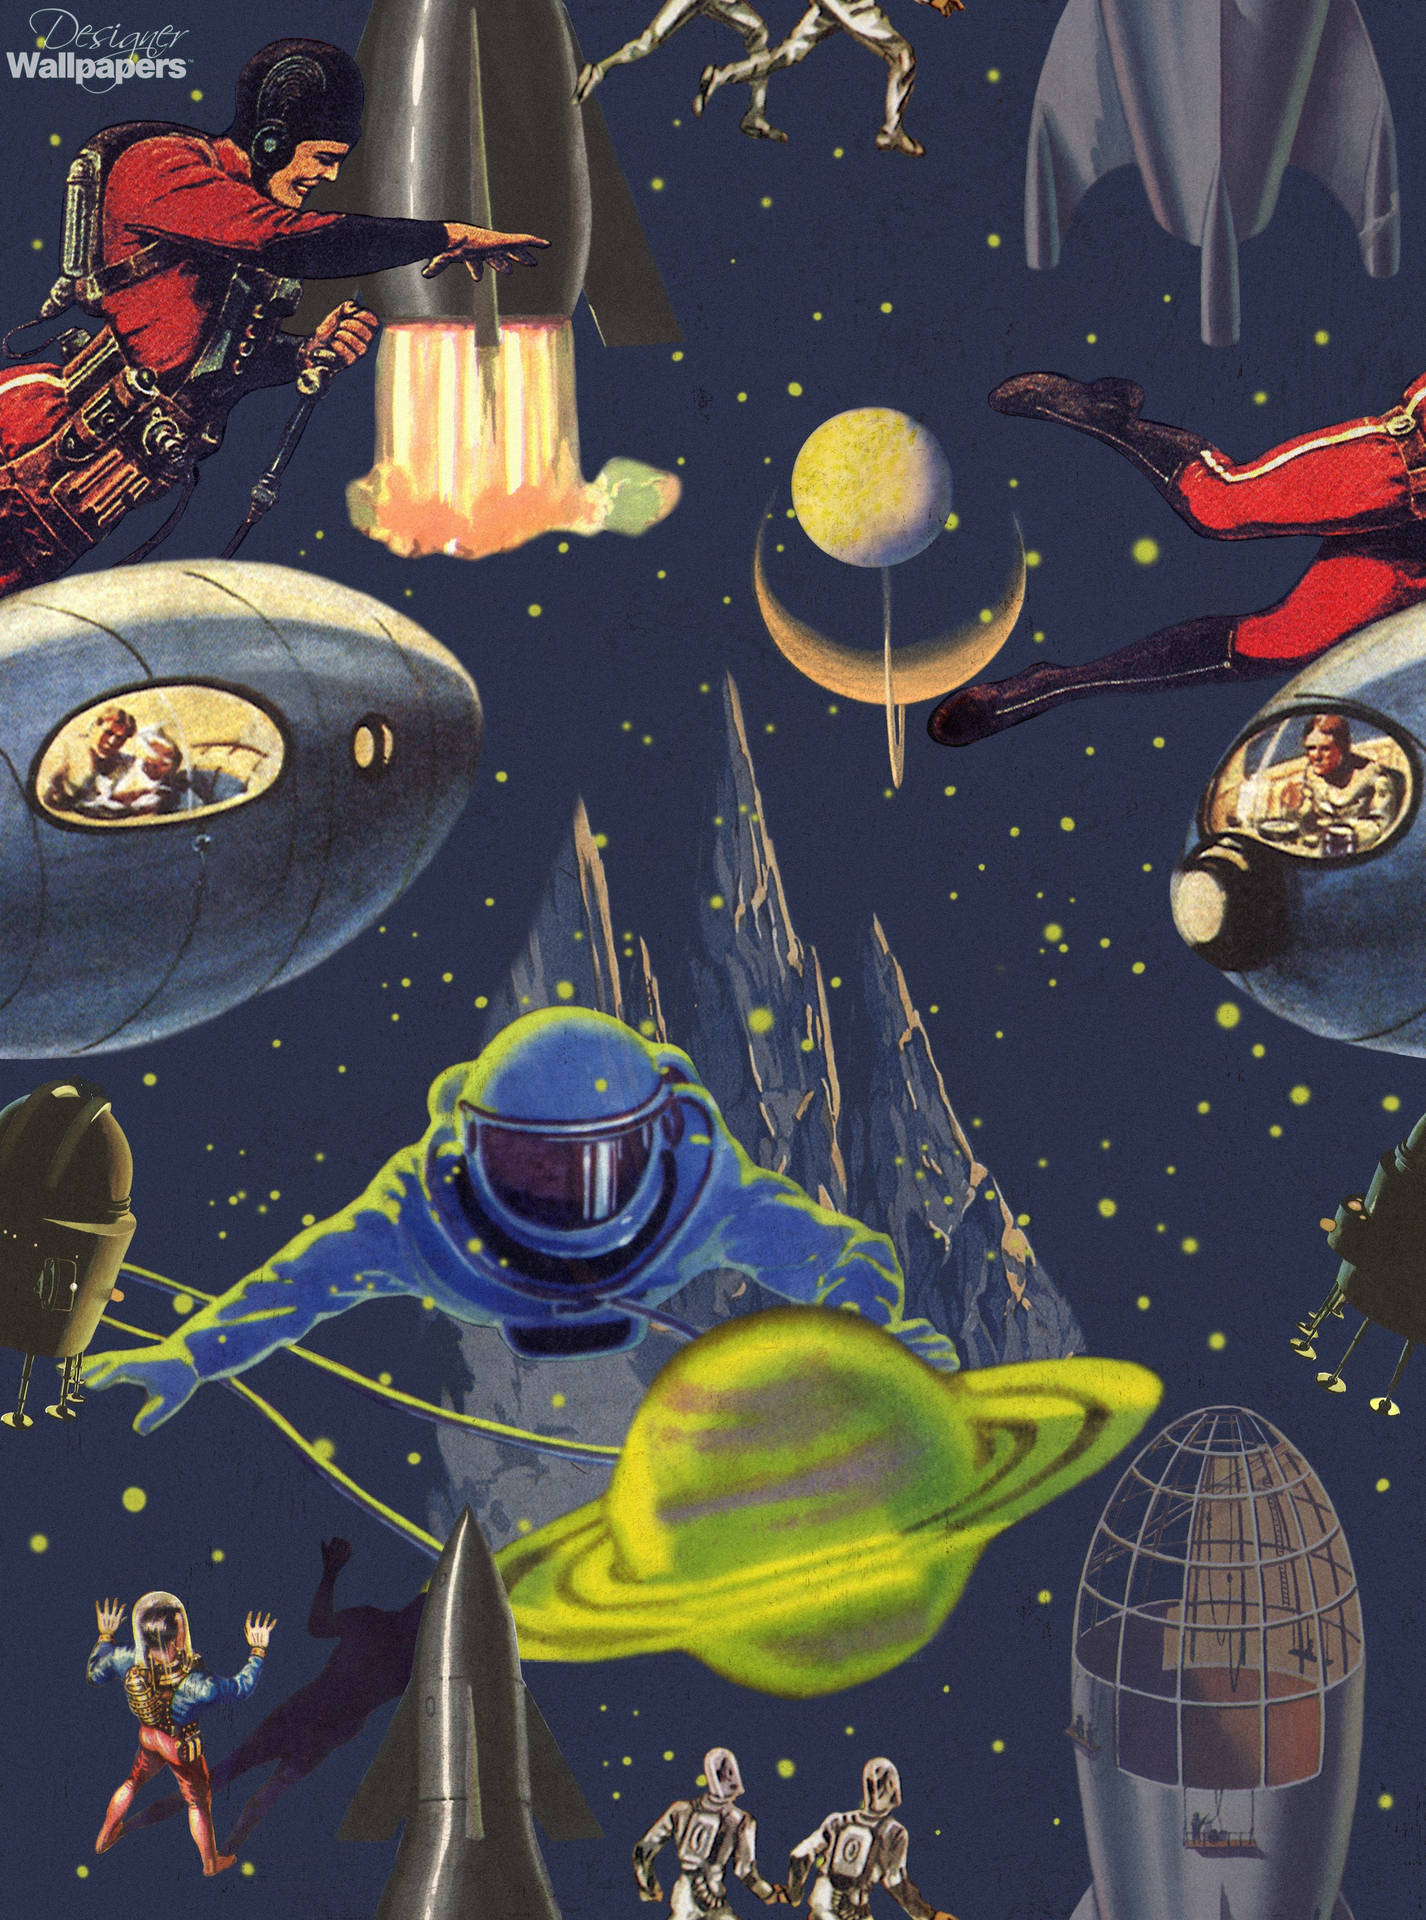 A Space Themed Fabric With Astronauts And Spaceships Wallpaper